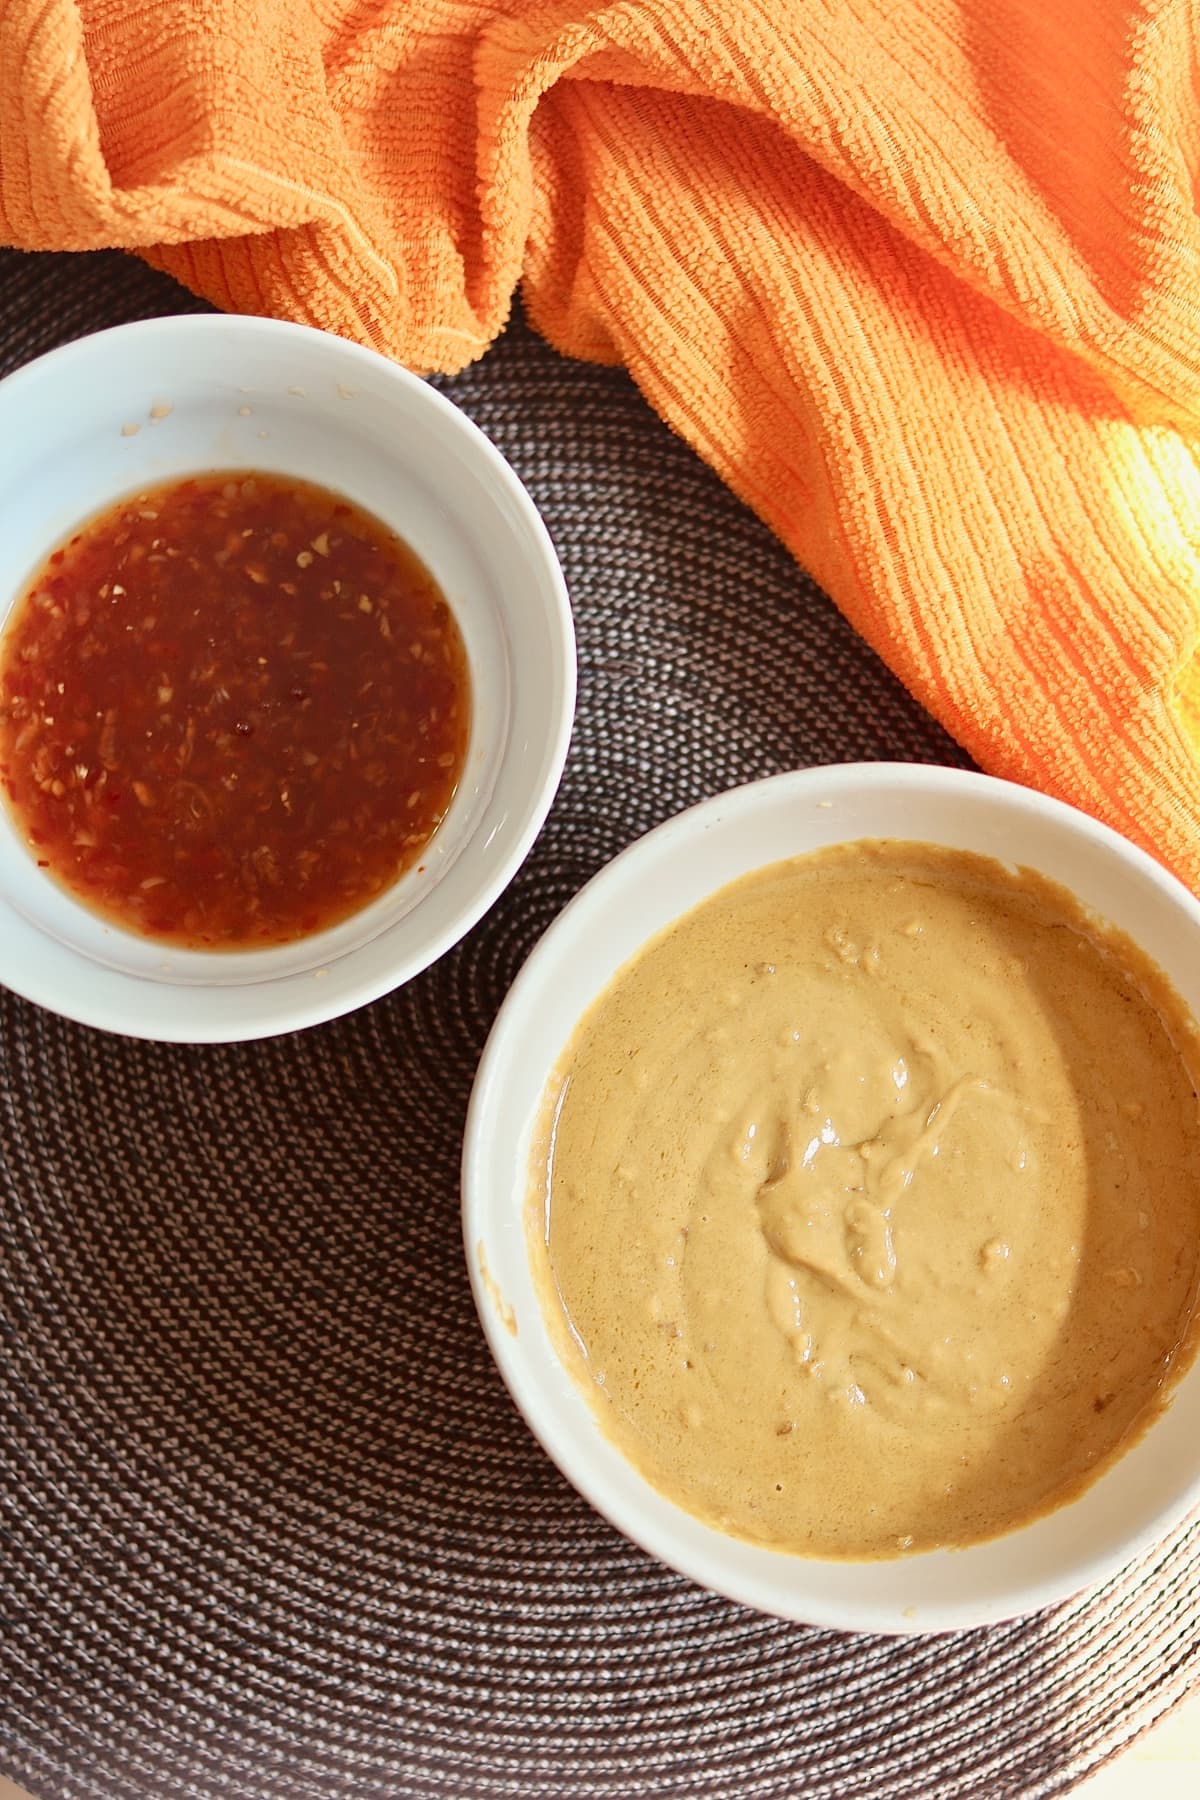 spring roll dipping sauces in bowls